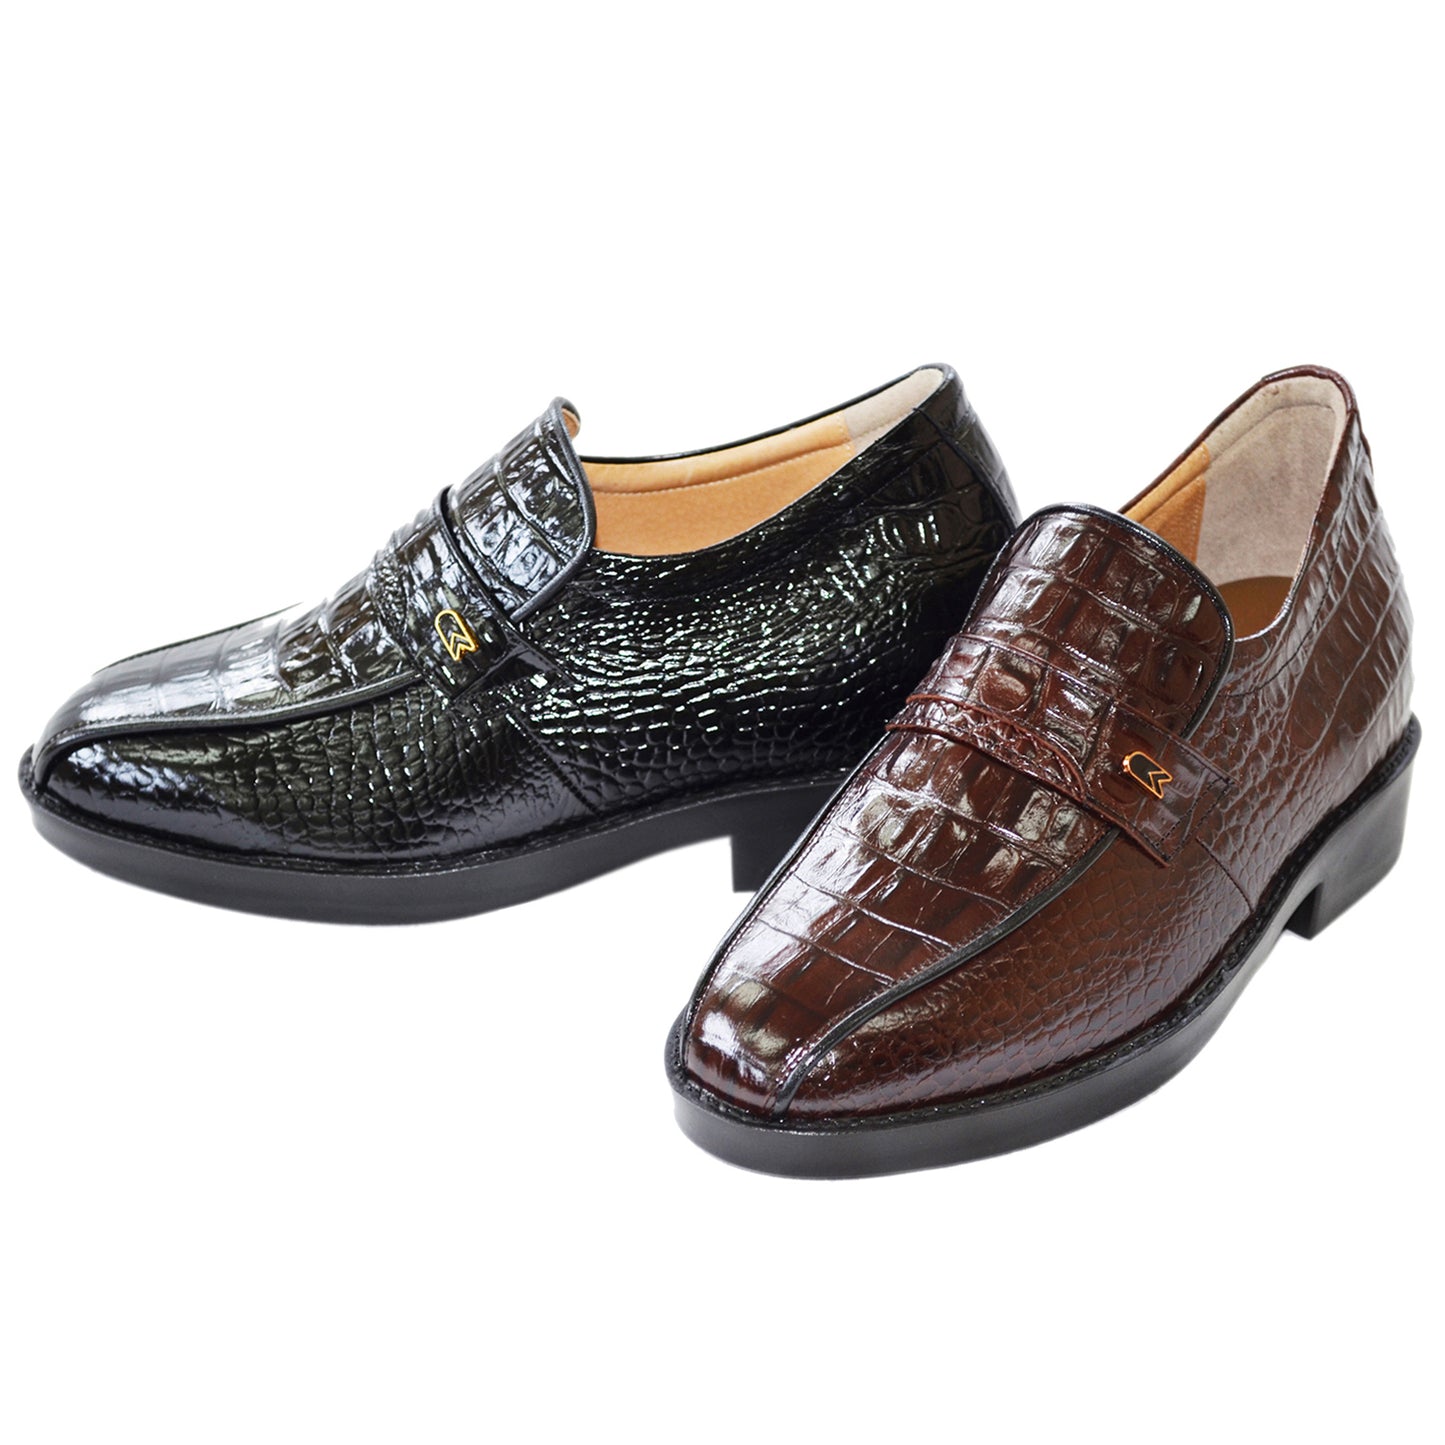 Men's Elevator Shoes Height Increasing 2.76" Taller Slip-on Dress Shoes Crocodile Embossed Cowhide Leather No. 236